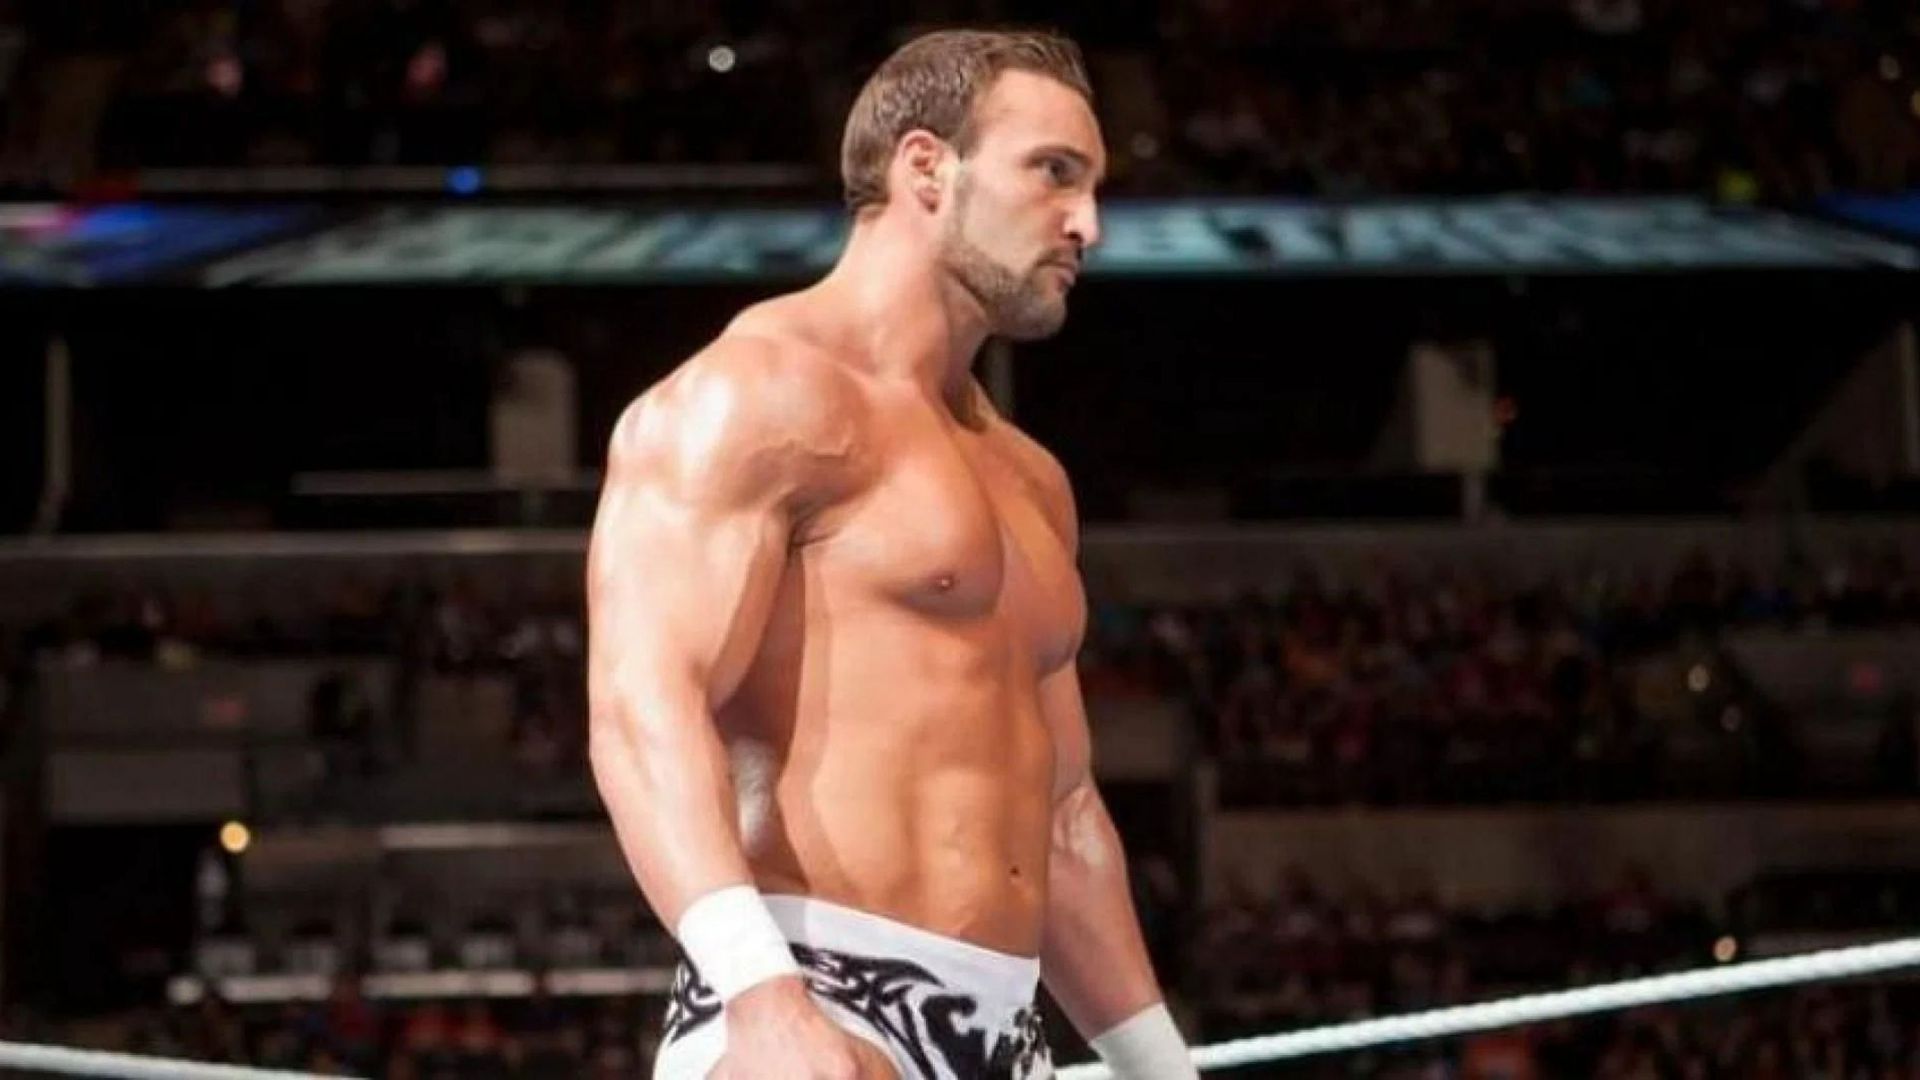 Sunny had a brief love affair with Chris Masters